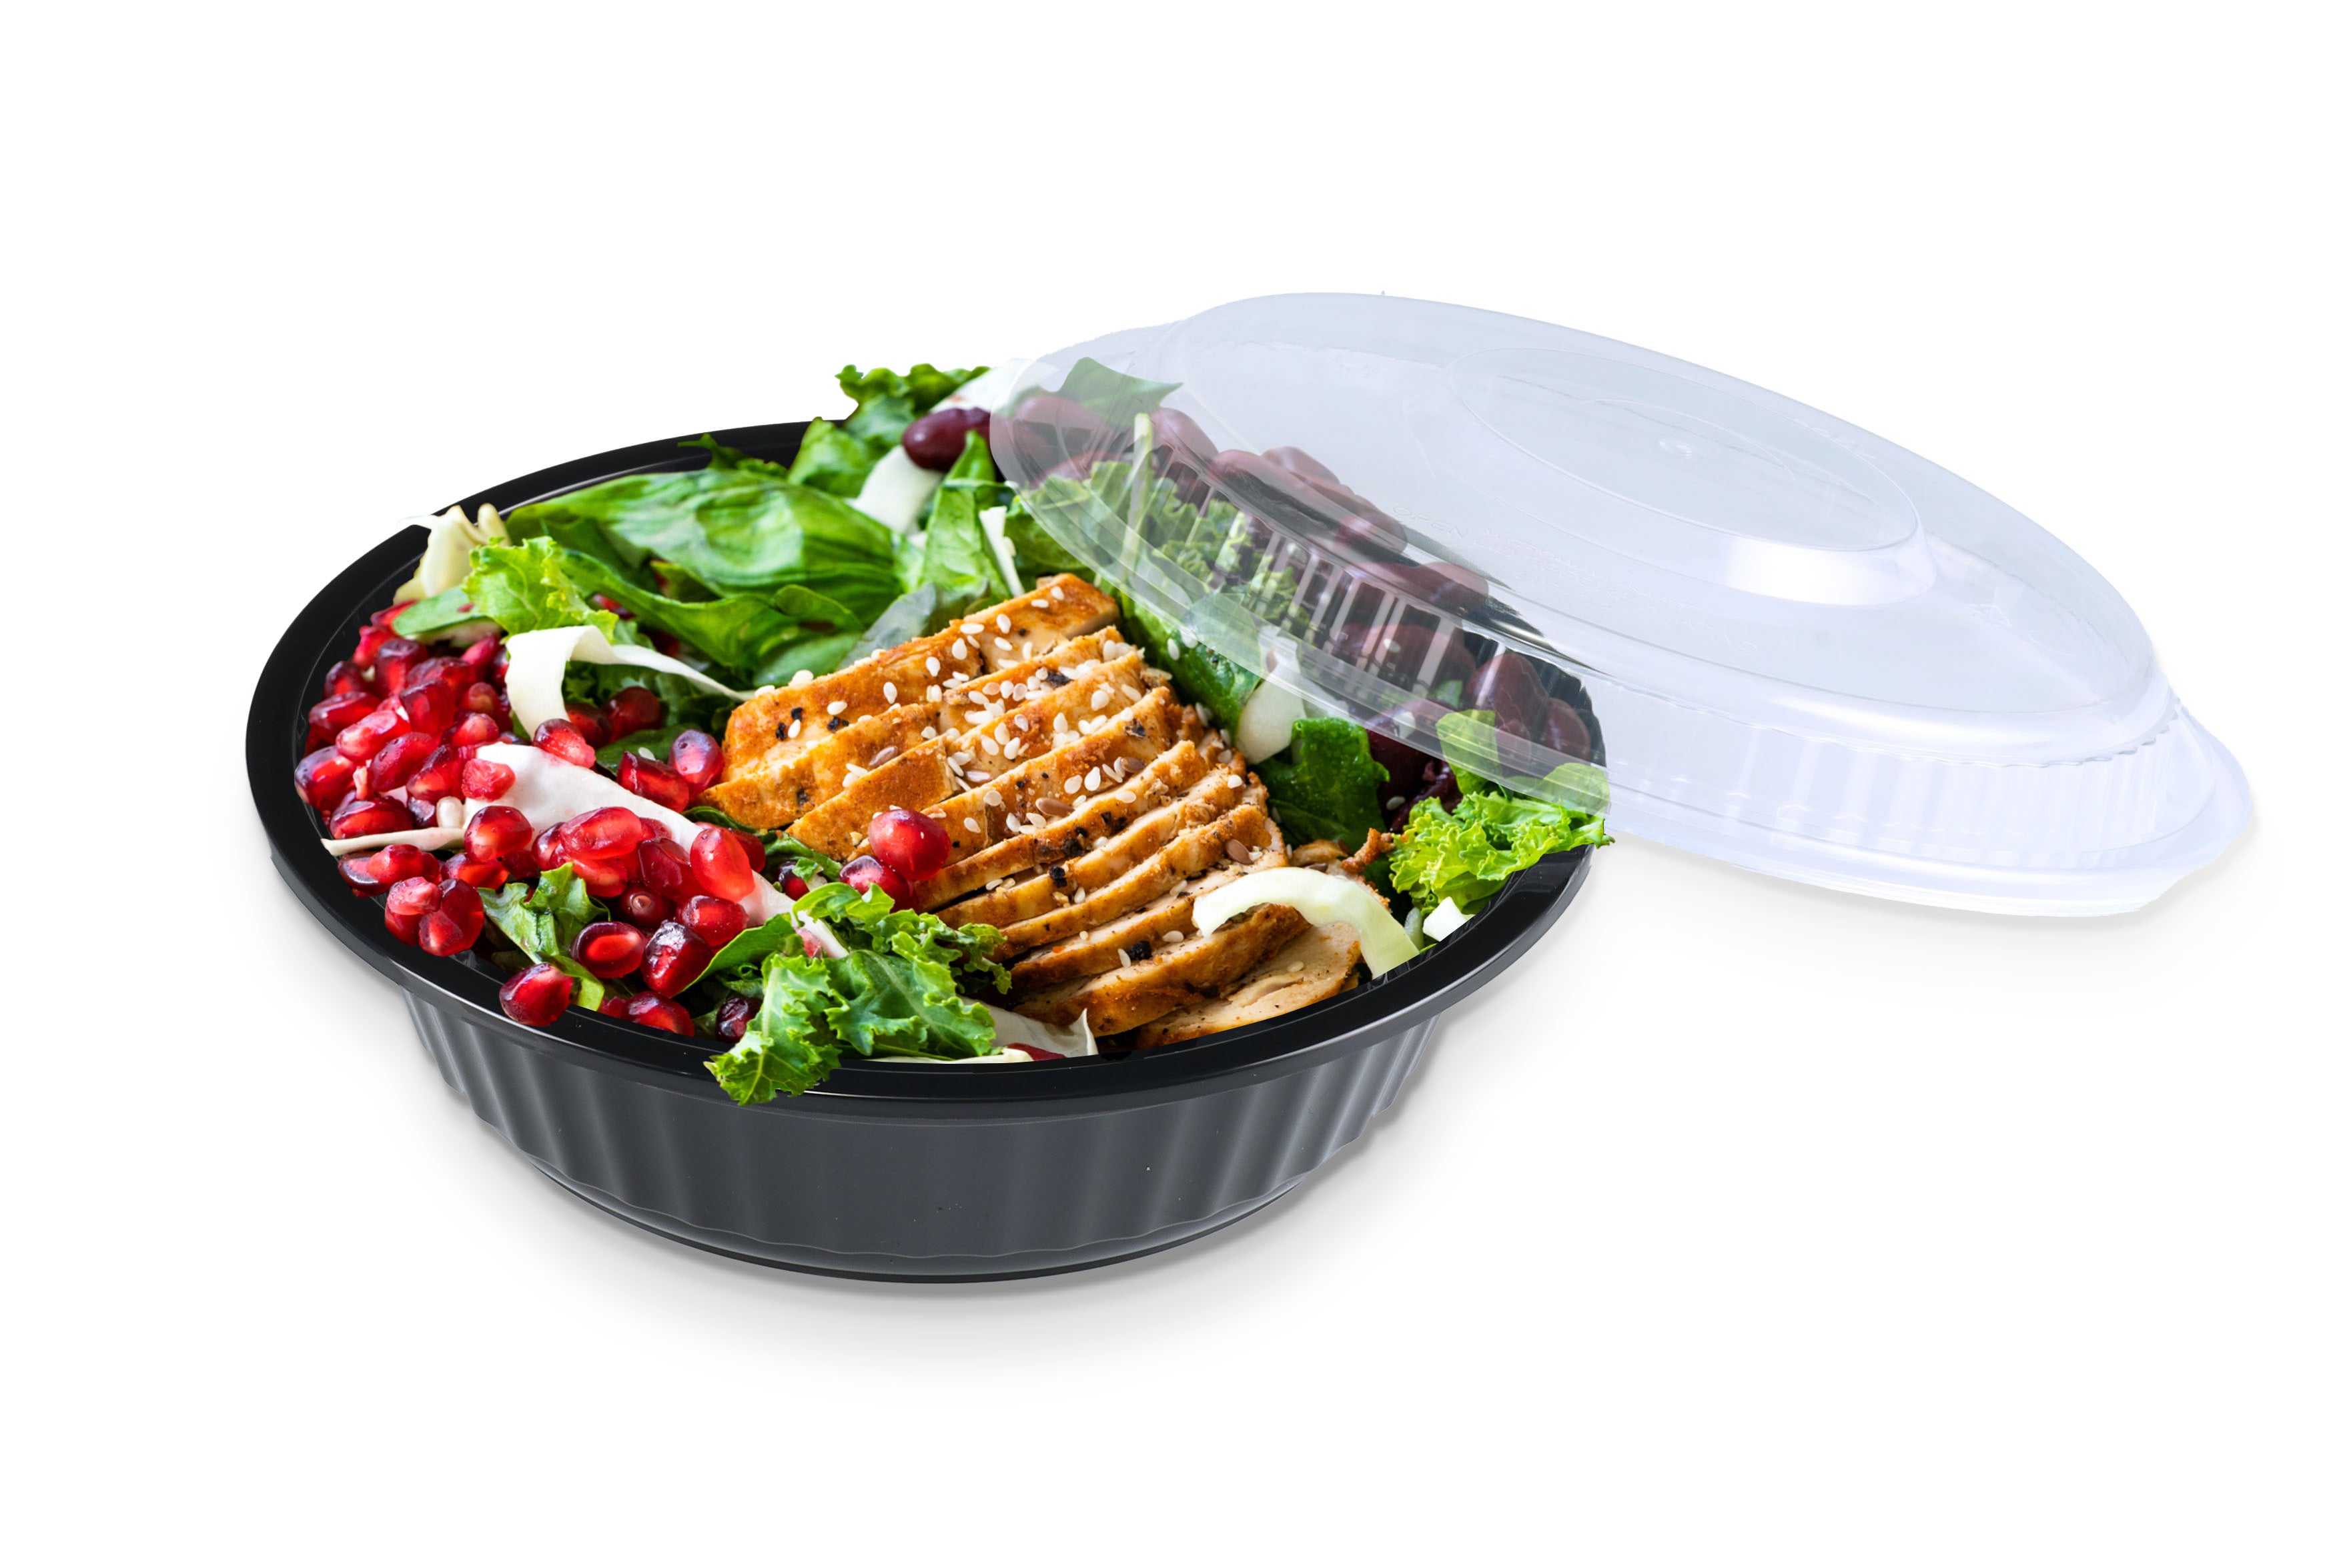 150 PACK] 24 oz Plastic Meal Prep Containers with Lids - Round Food Storage  Container Microwave Safe - BPA-Free, Stackable, Reusable, Dishwasher,  Freezer Safe, Disposable (Black) 